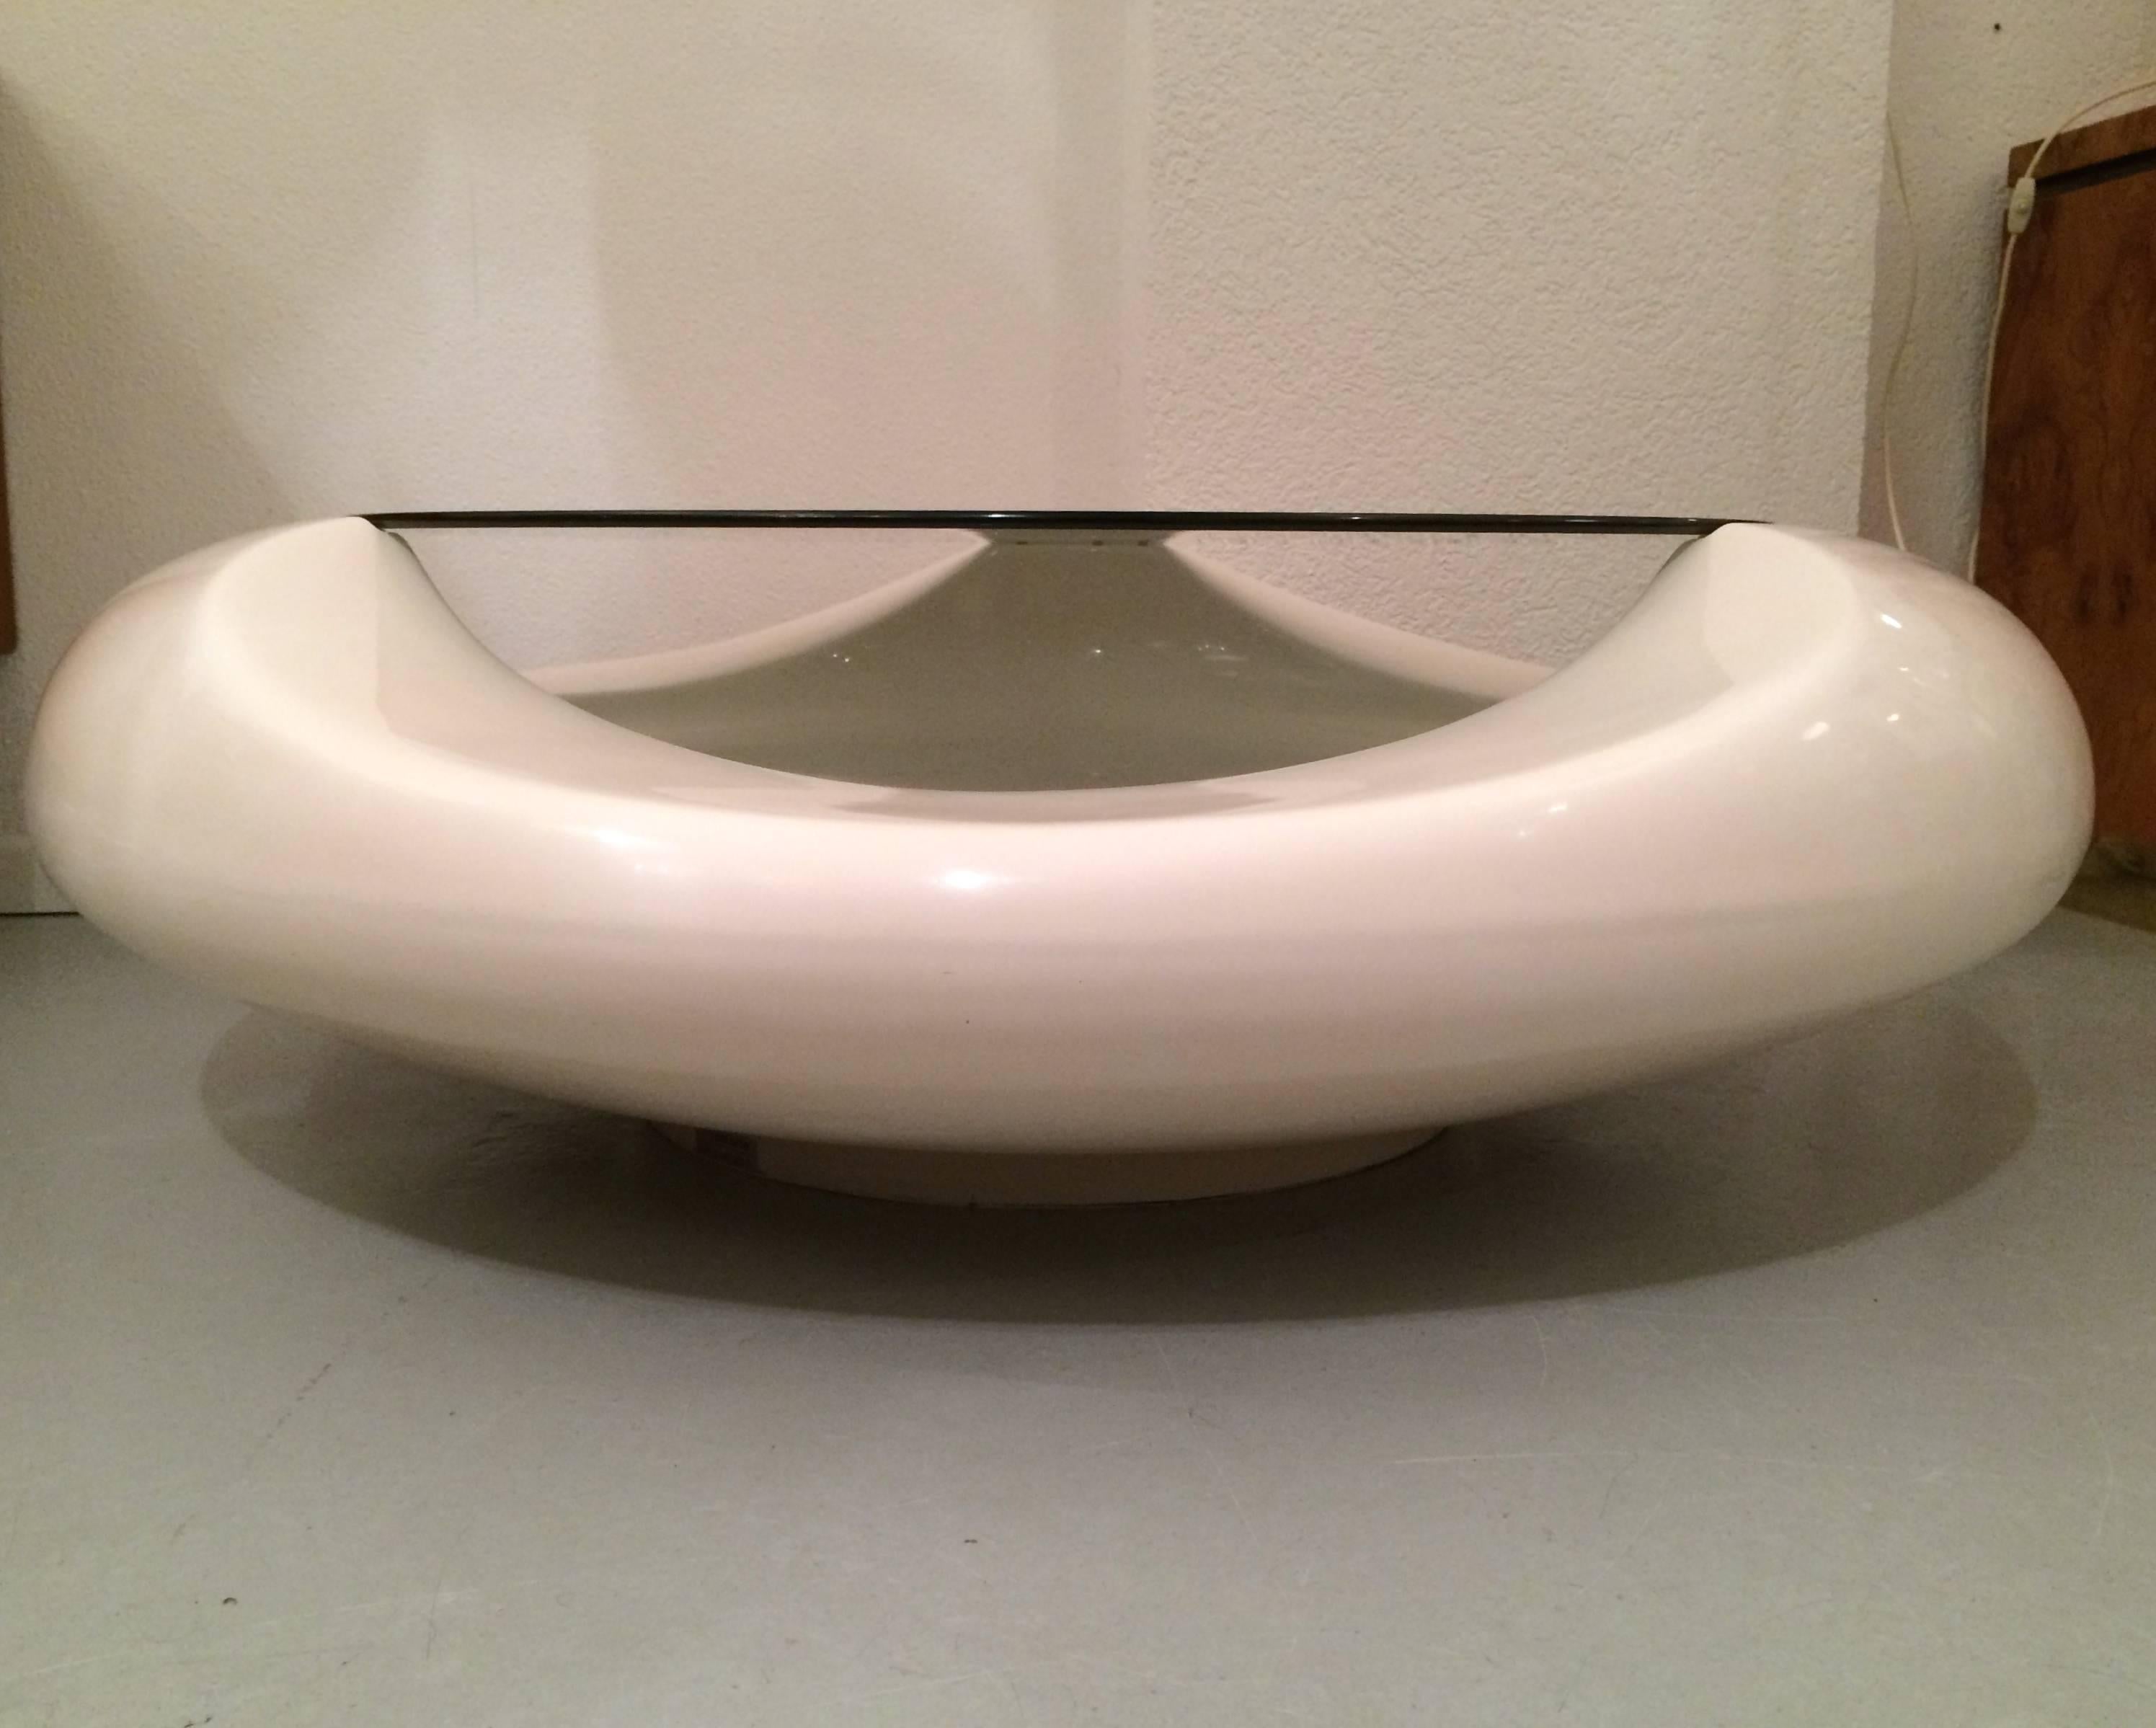 Vintage Space Age white fiberglass coffee table by Astarte Milano, circa 1970.
Smoked glass top.
Very good condition.